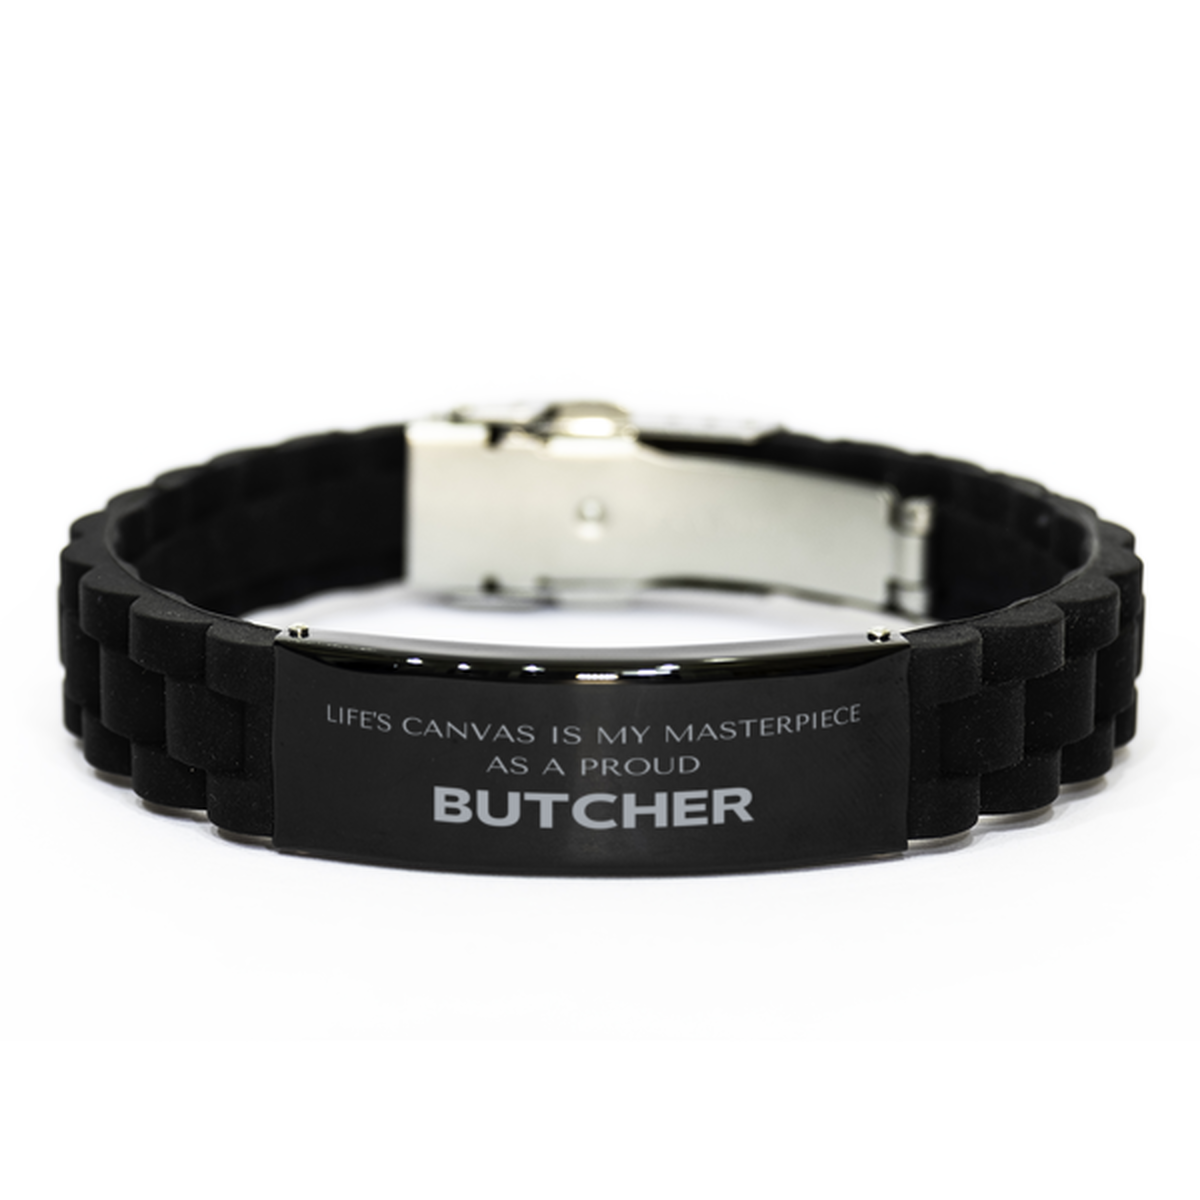 Proud Butcher Gifts, Life's canvas is my masterpiece, Epic Birthday Christmas Unique Black Glidelock Clasp Bracelet For Butcher, Coworkers, Men, Women, Friends